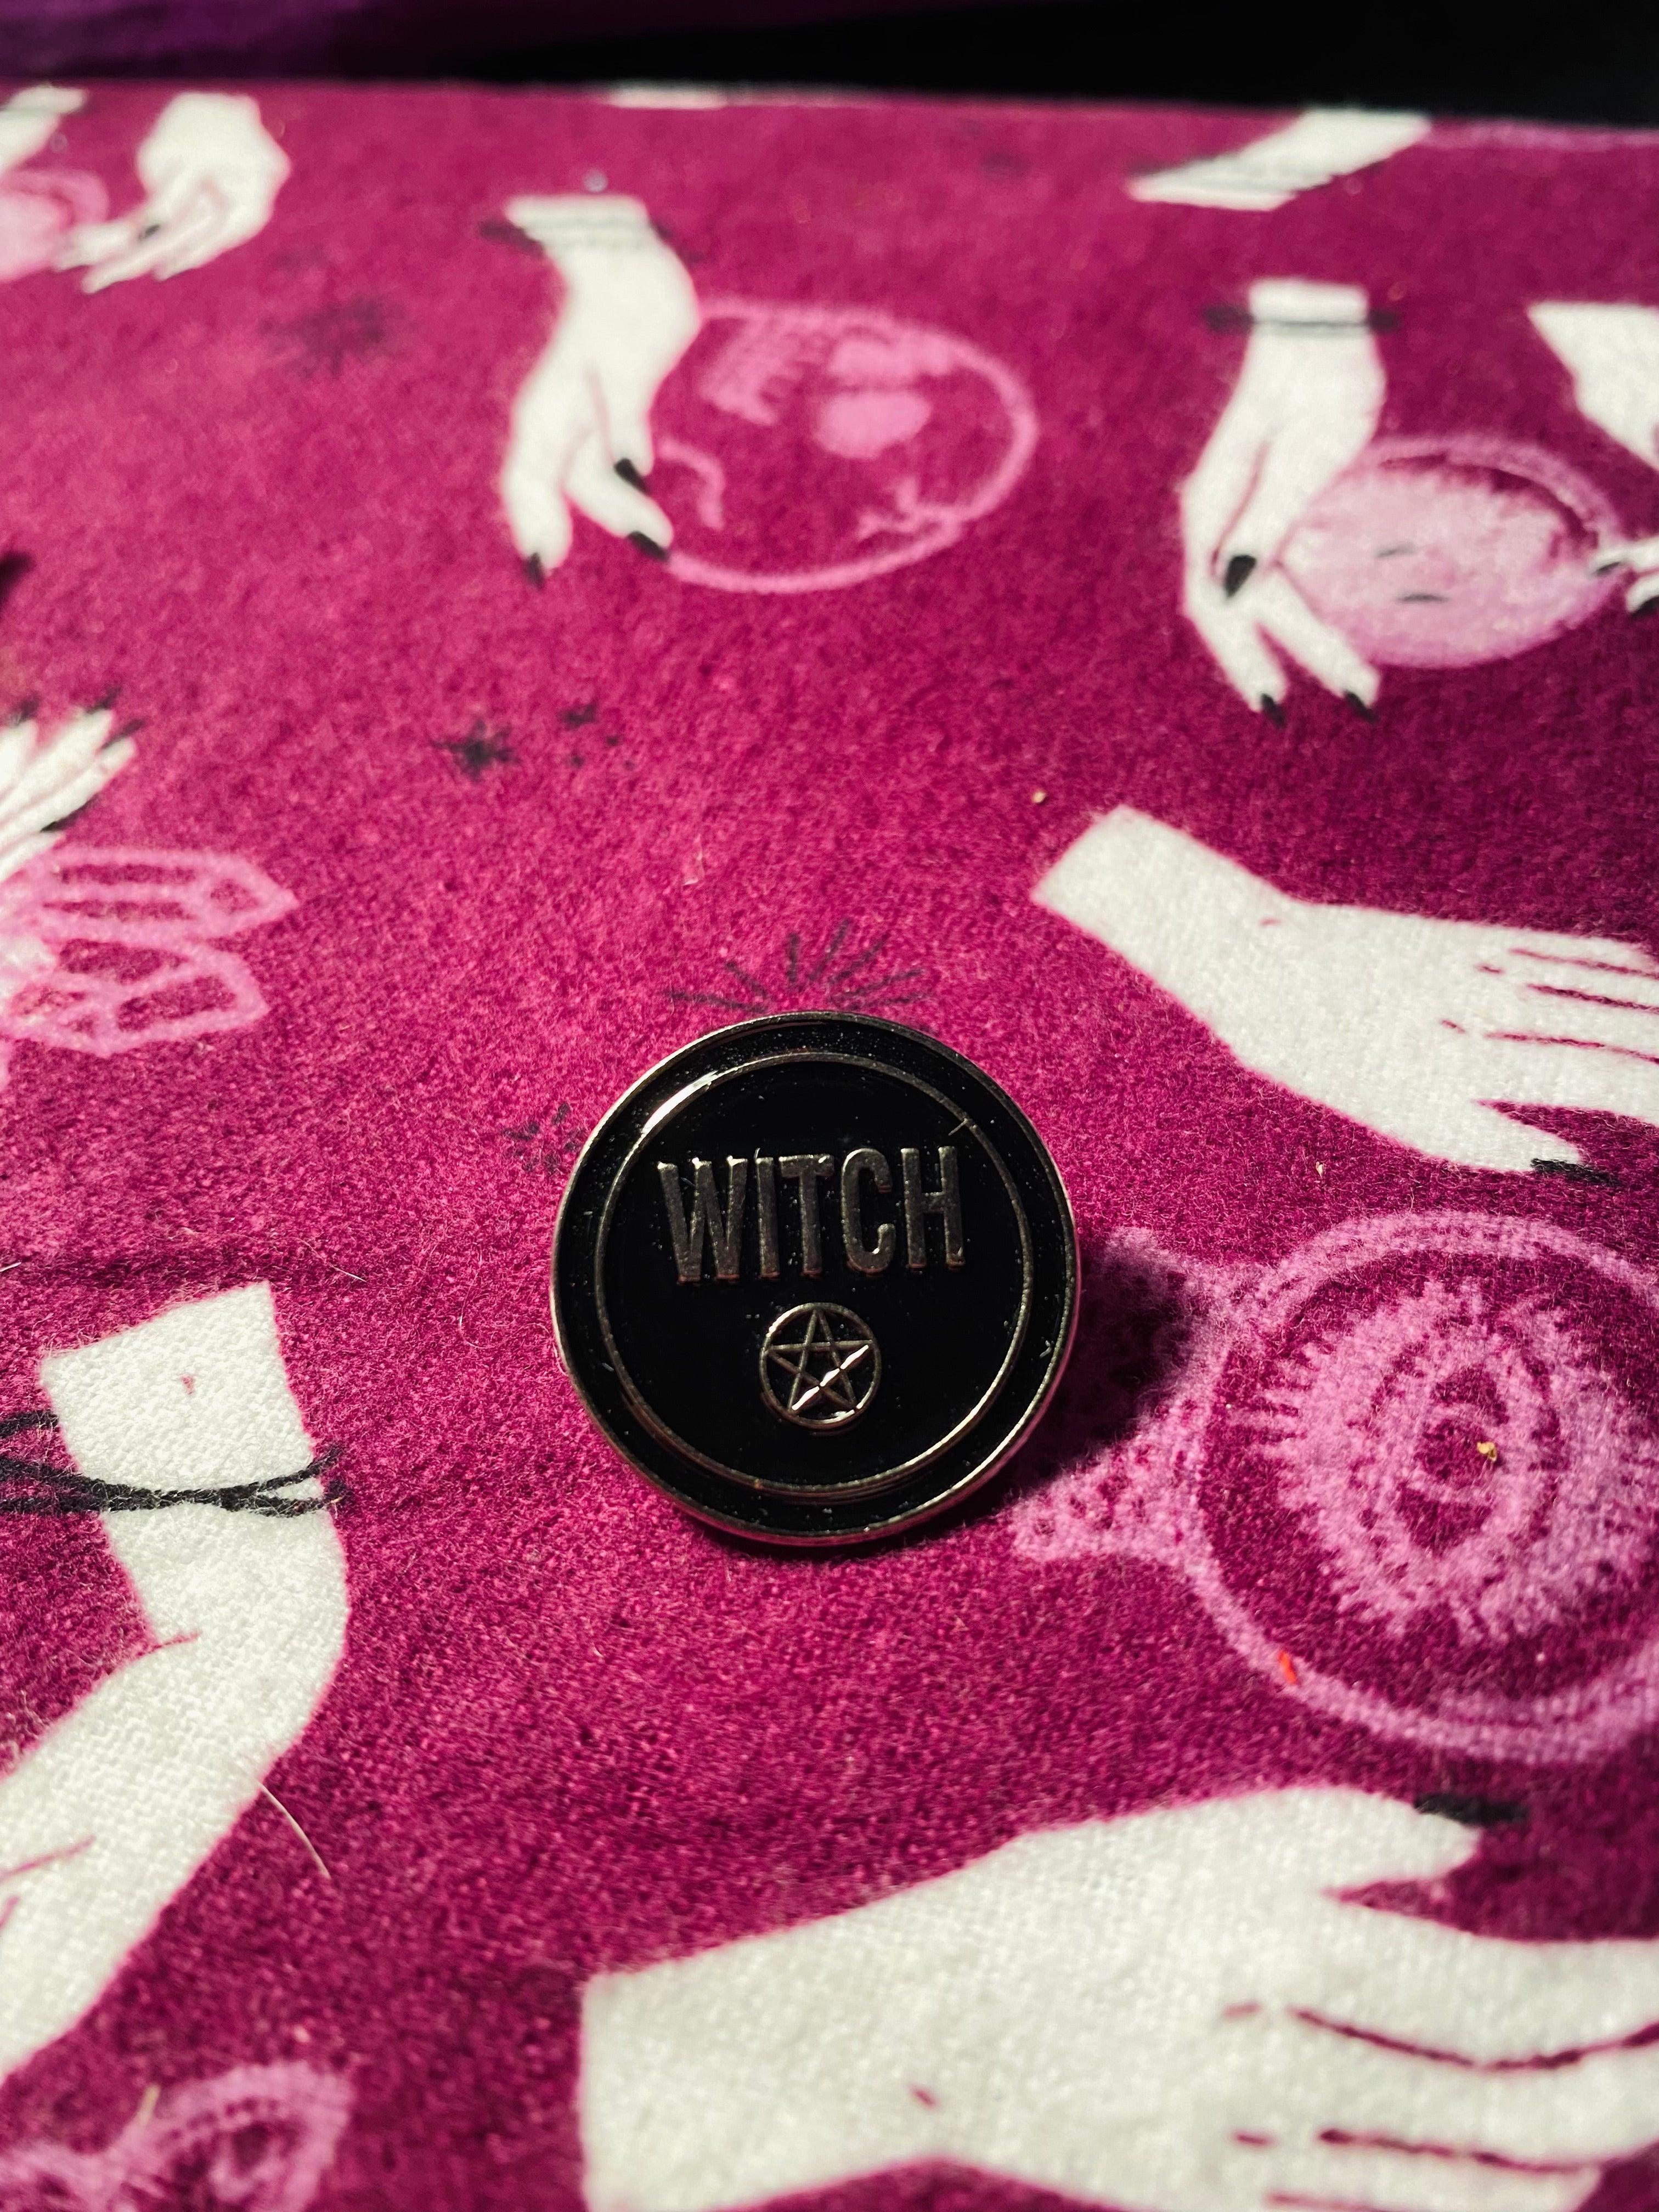 Wiccan Pins | Book Bag | Tarot | Moon | Witches Do It Better | Spells | Gothic Pins | - Sunlitsage